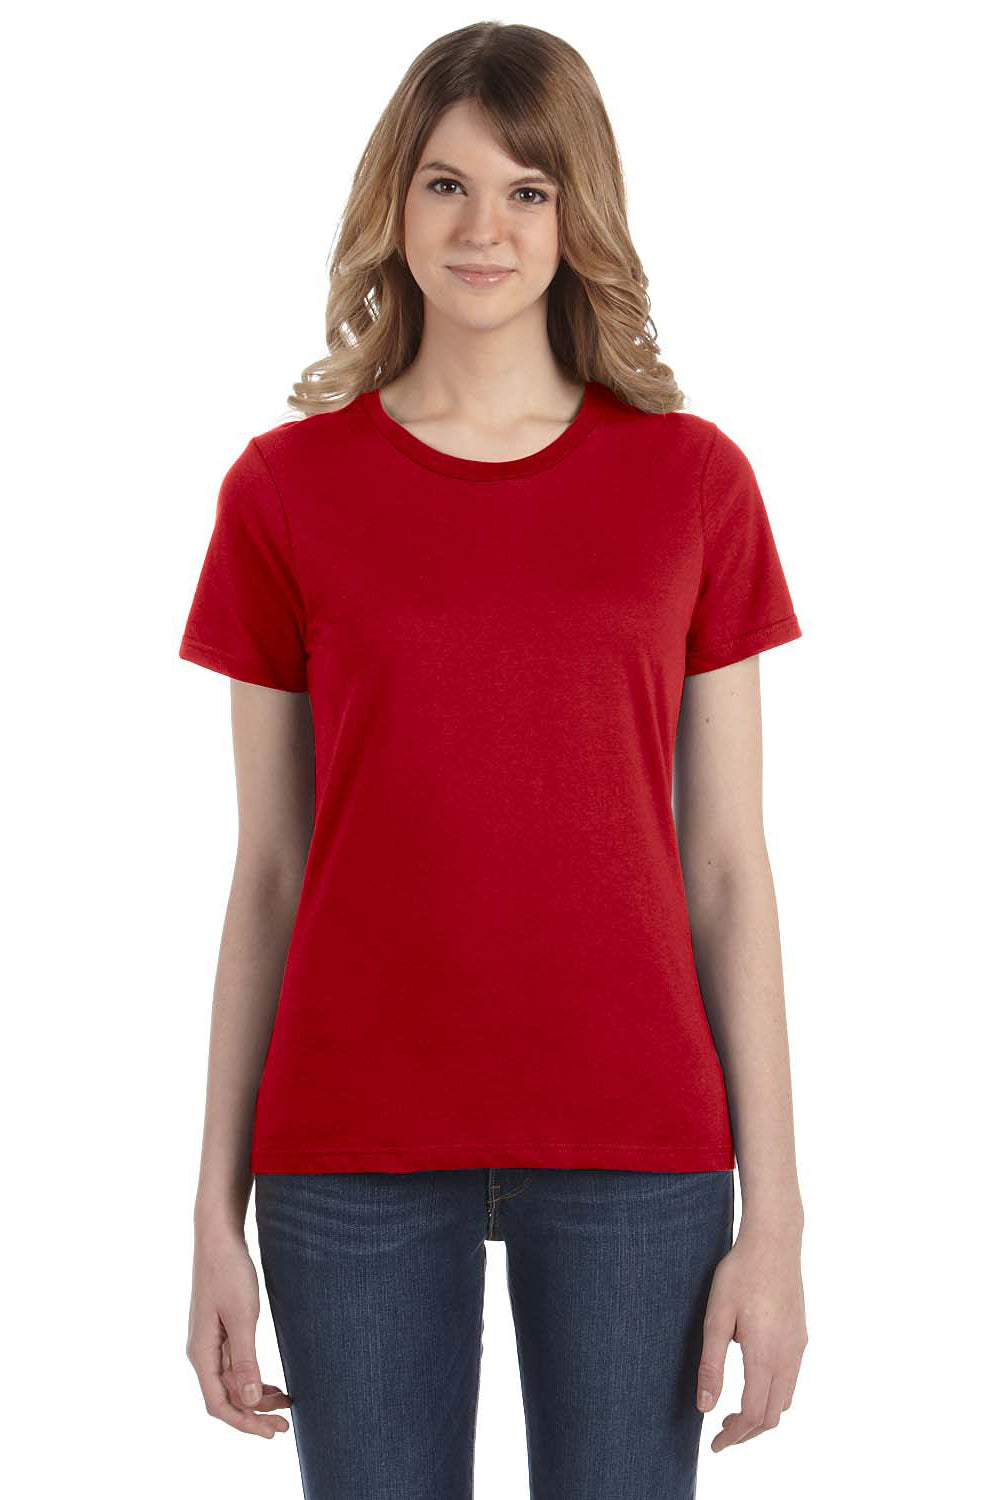 Anvil 880 Womens Short Sleeve Crewneck T-Shirt Red Front